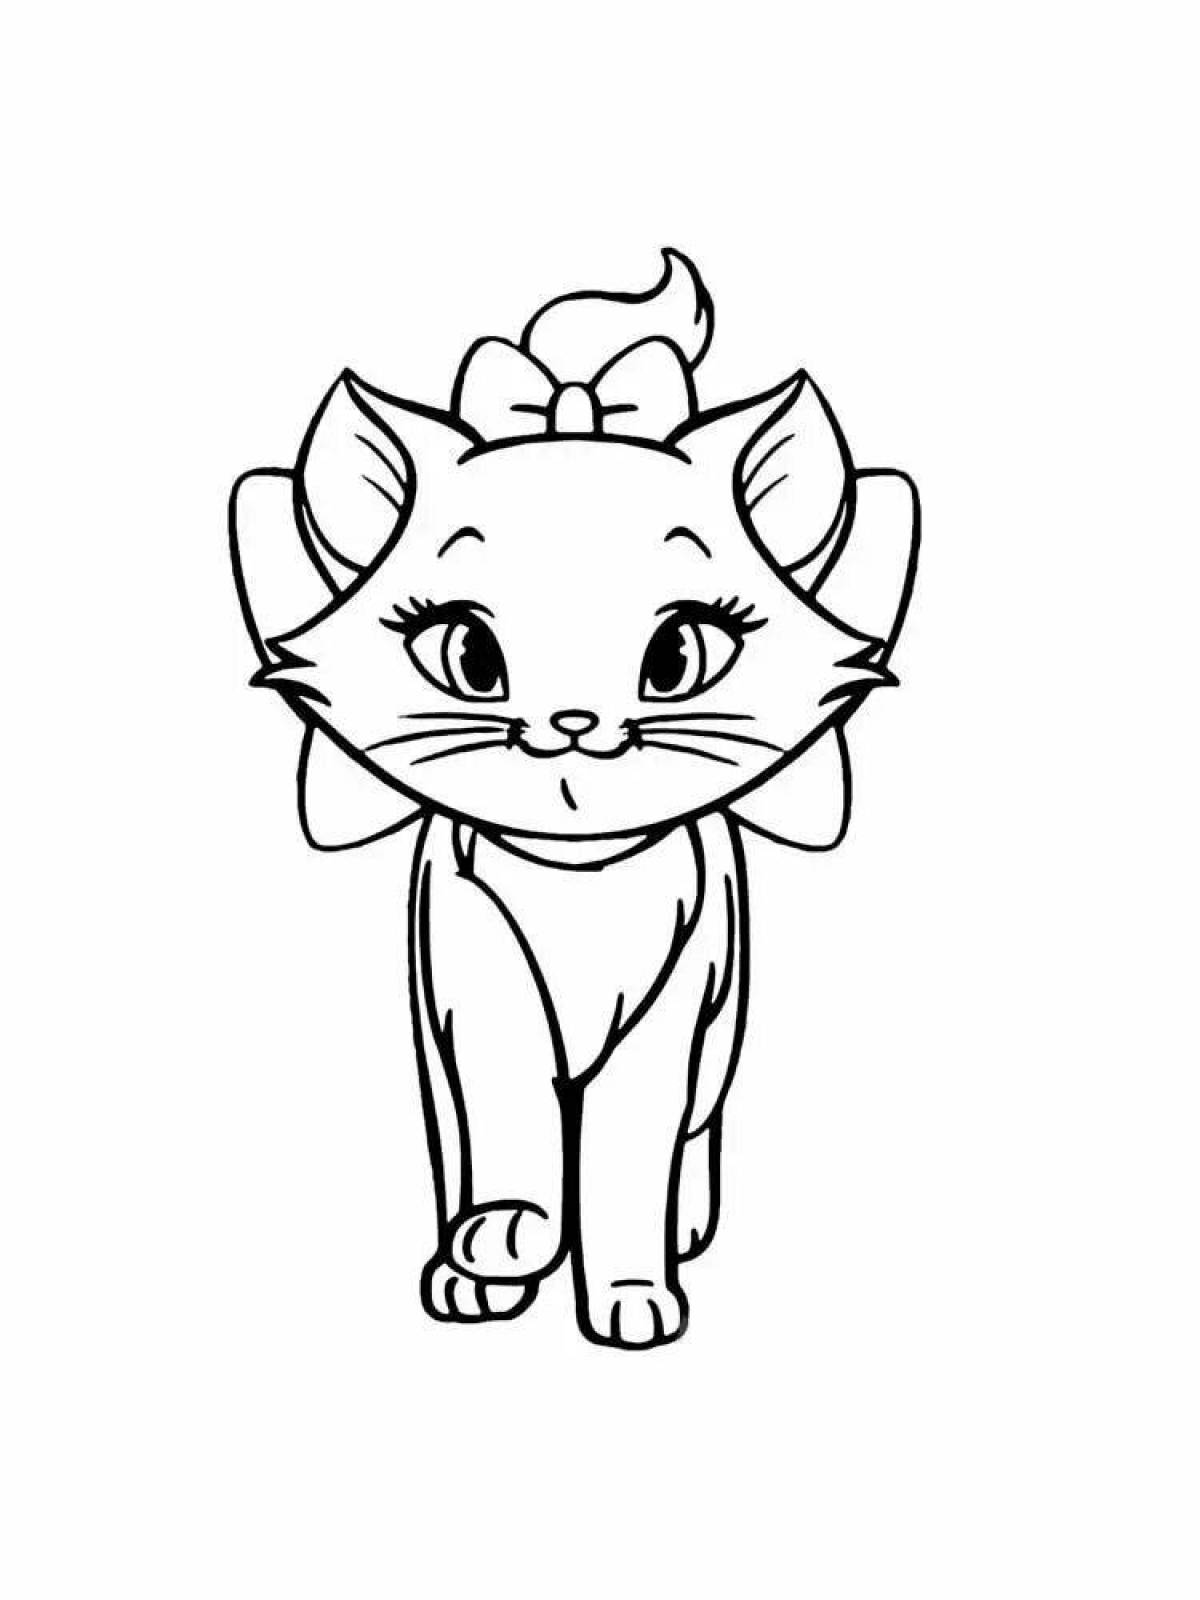 Colorful marie kitty coloring page